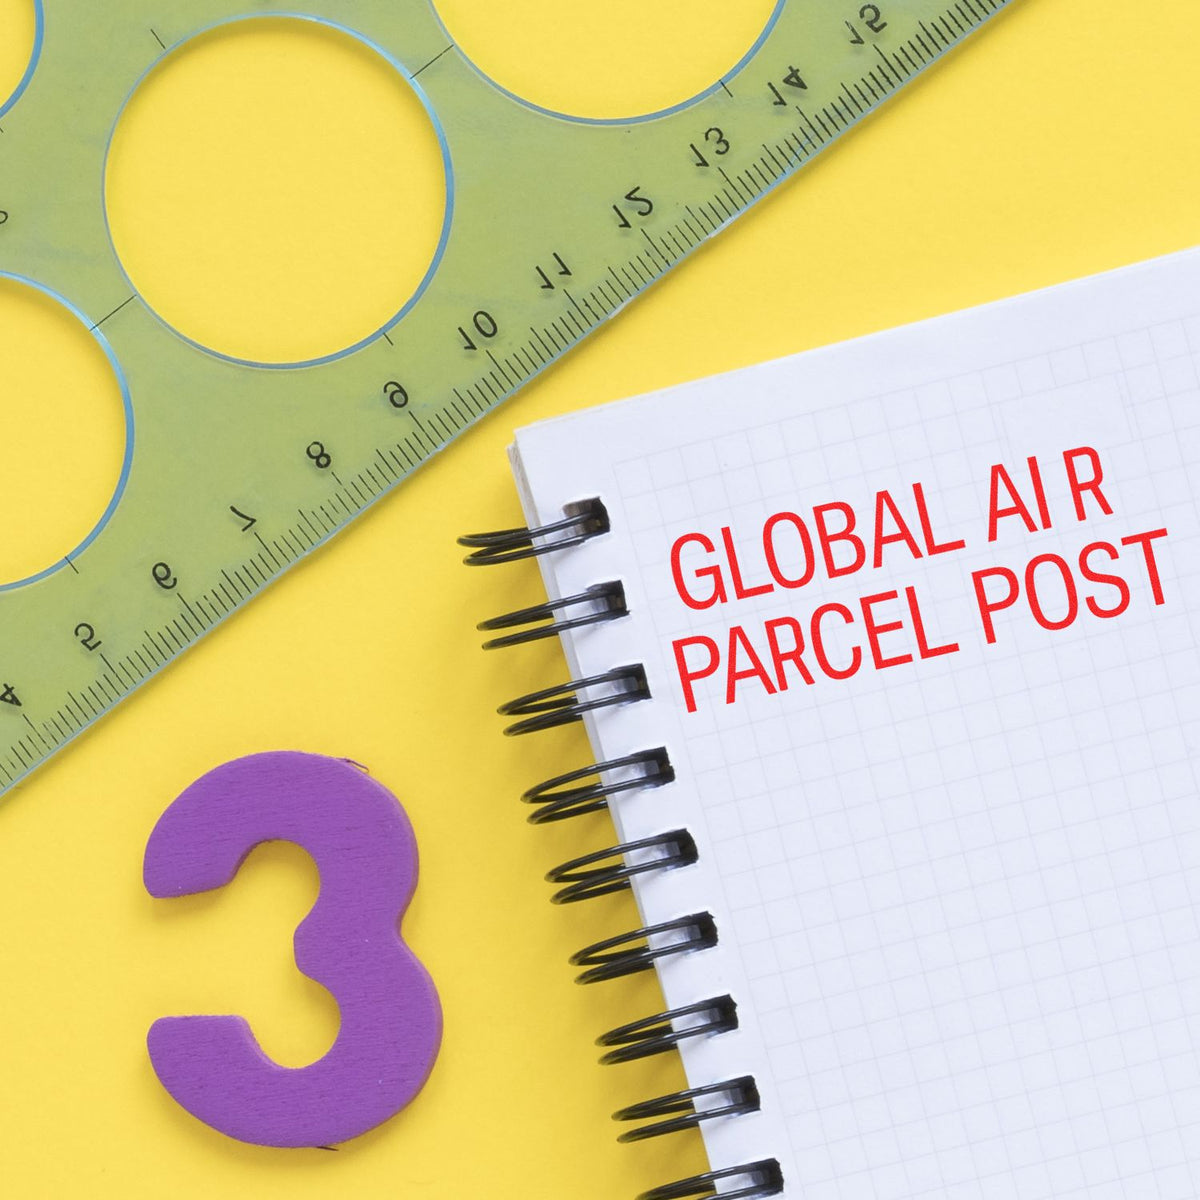 Global Air Parcel Post Rubber Stamp In Use Photo